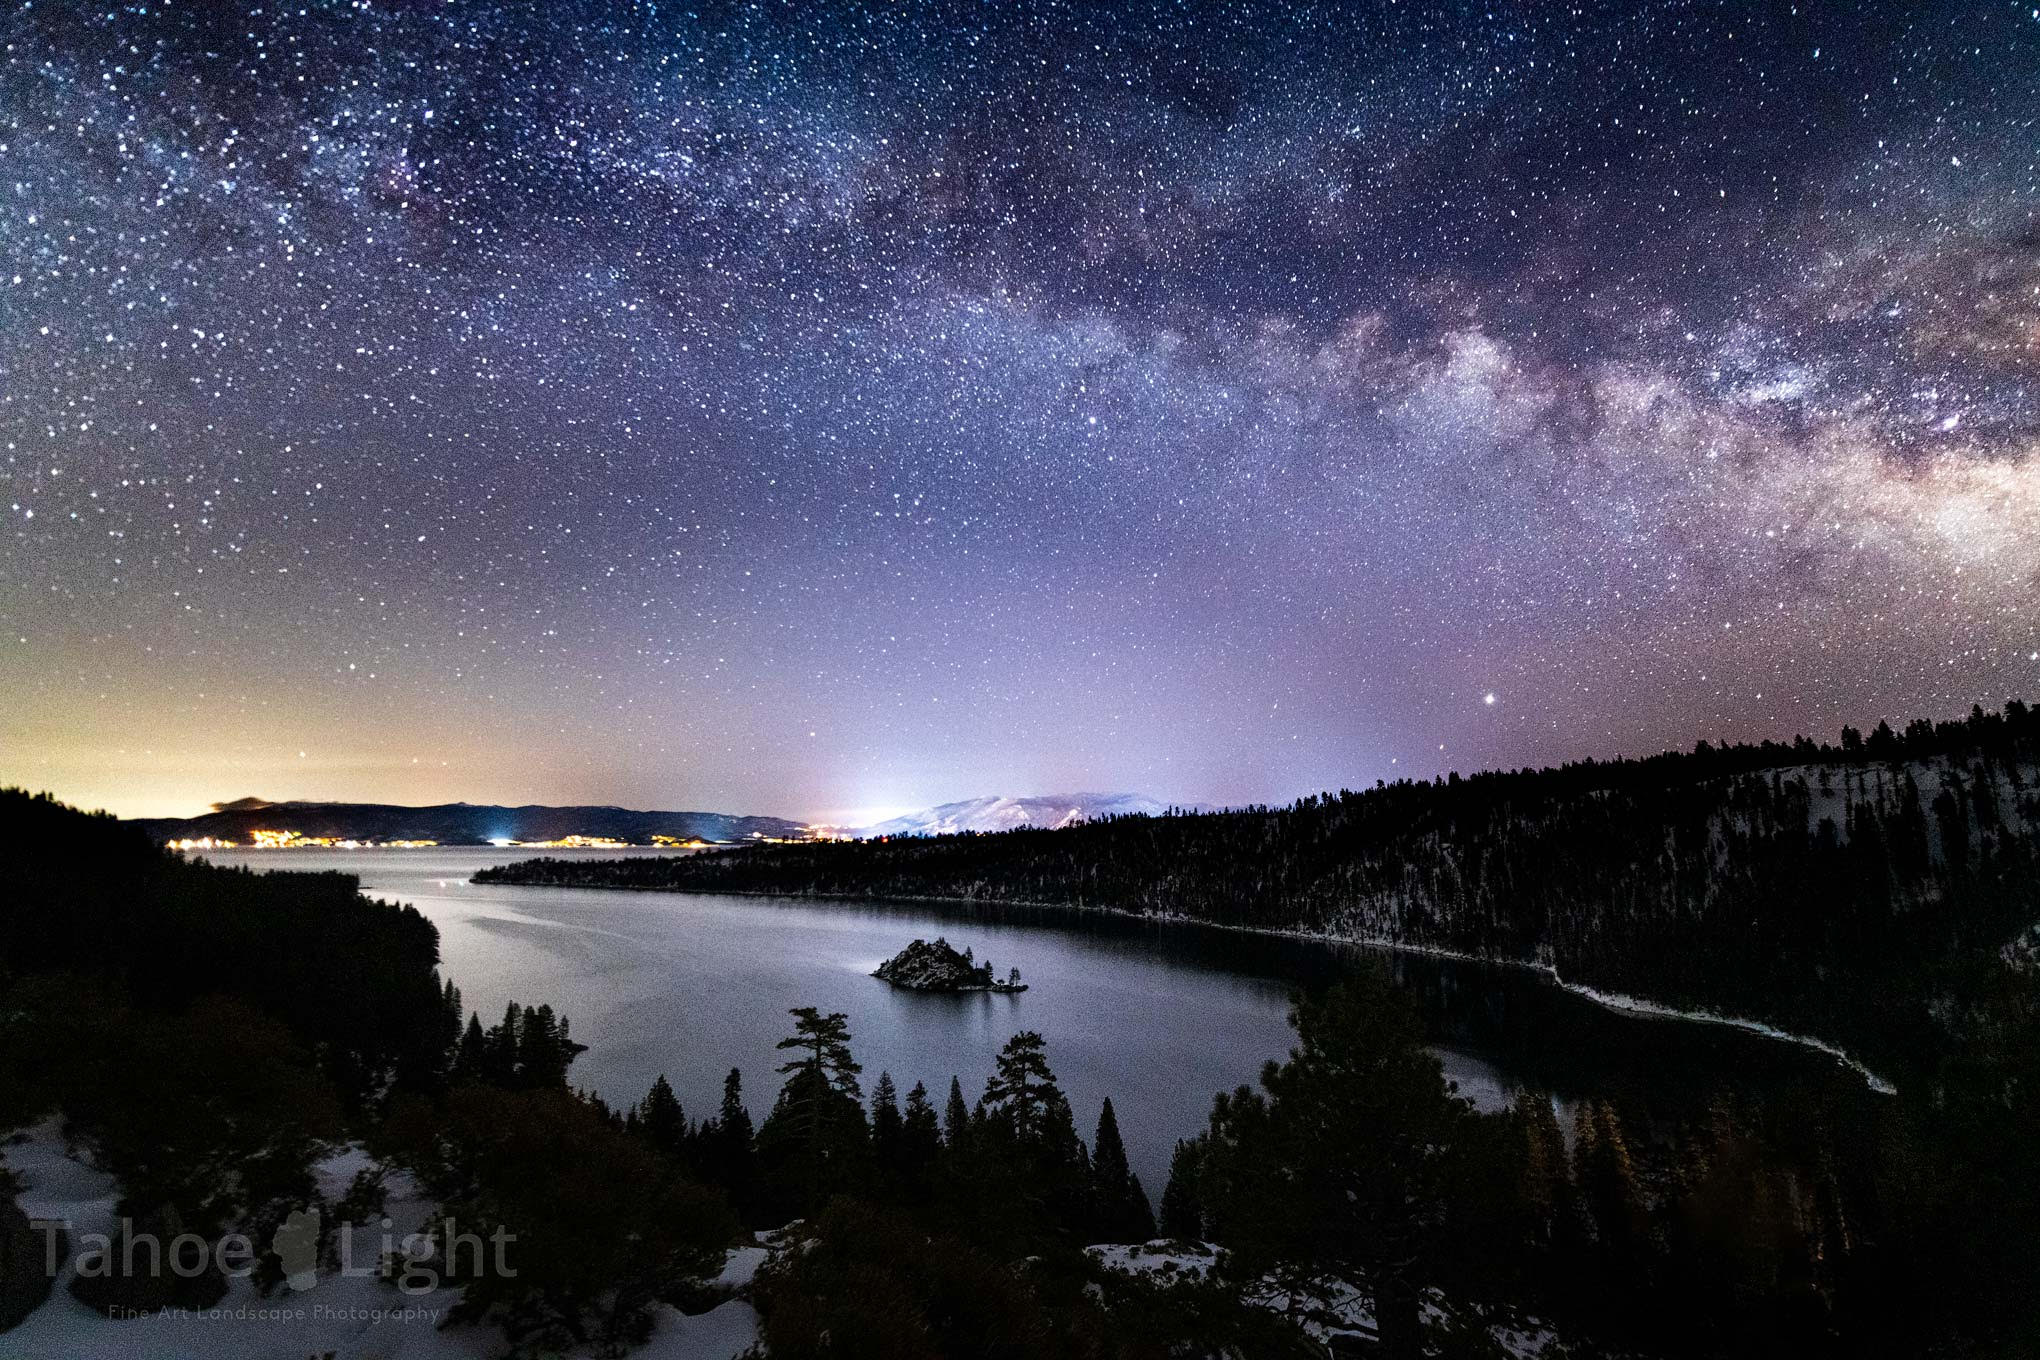 Lake Tahoe's Emerald Bay under a star-filled sky.